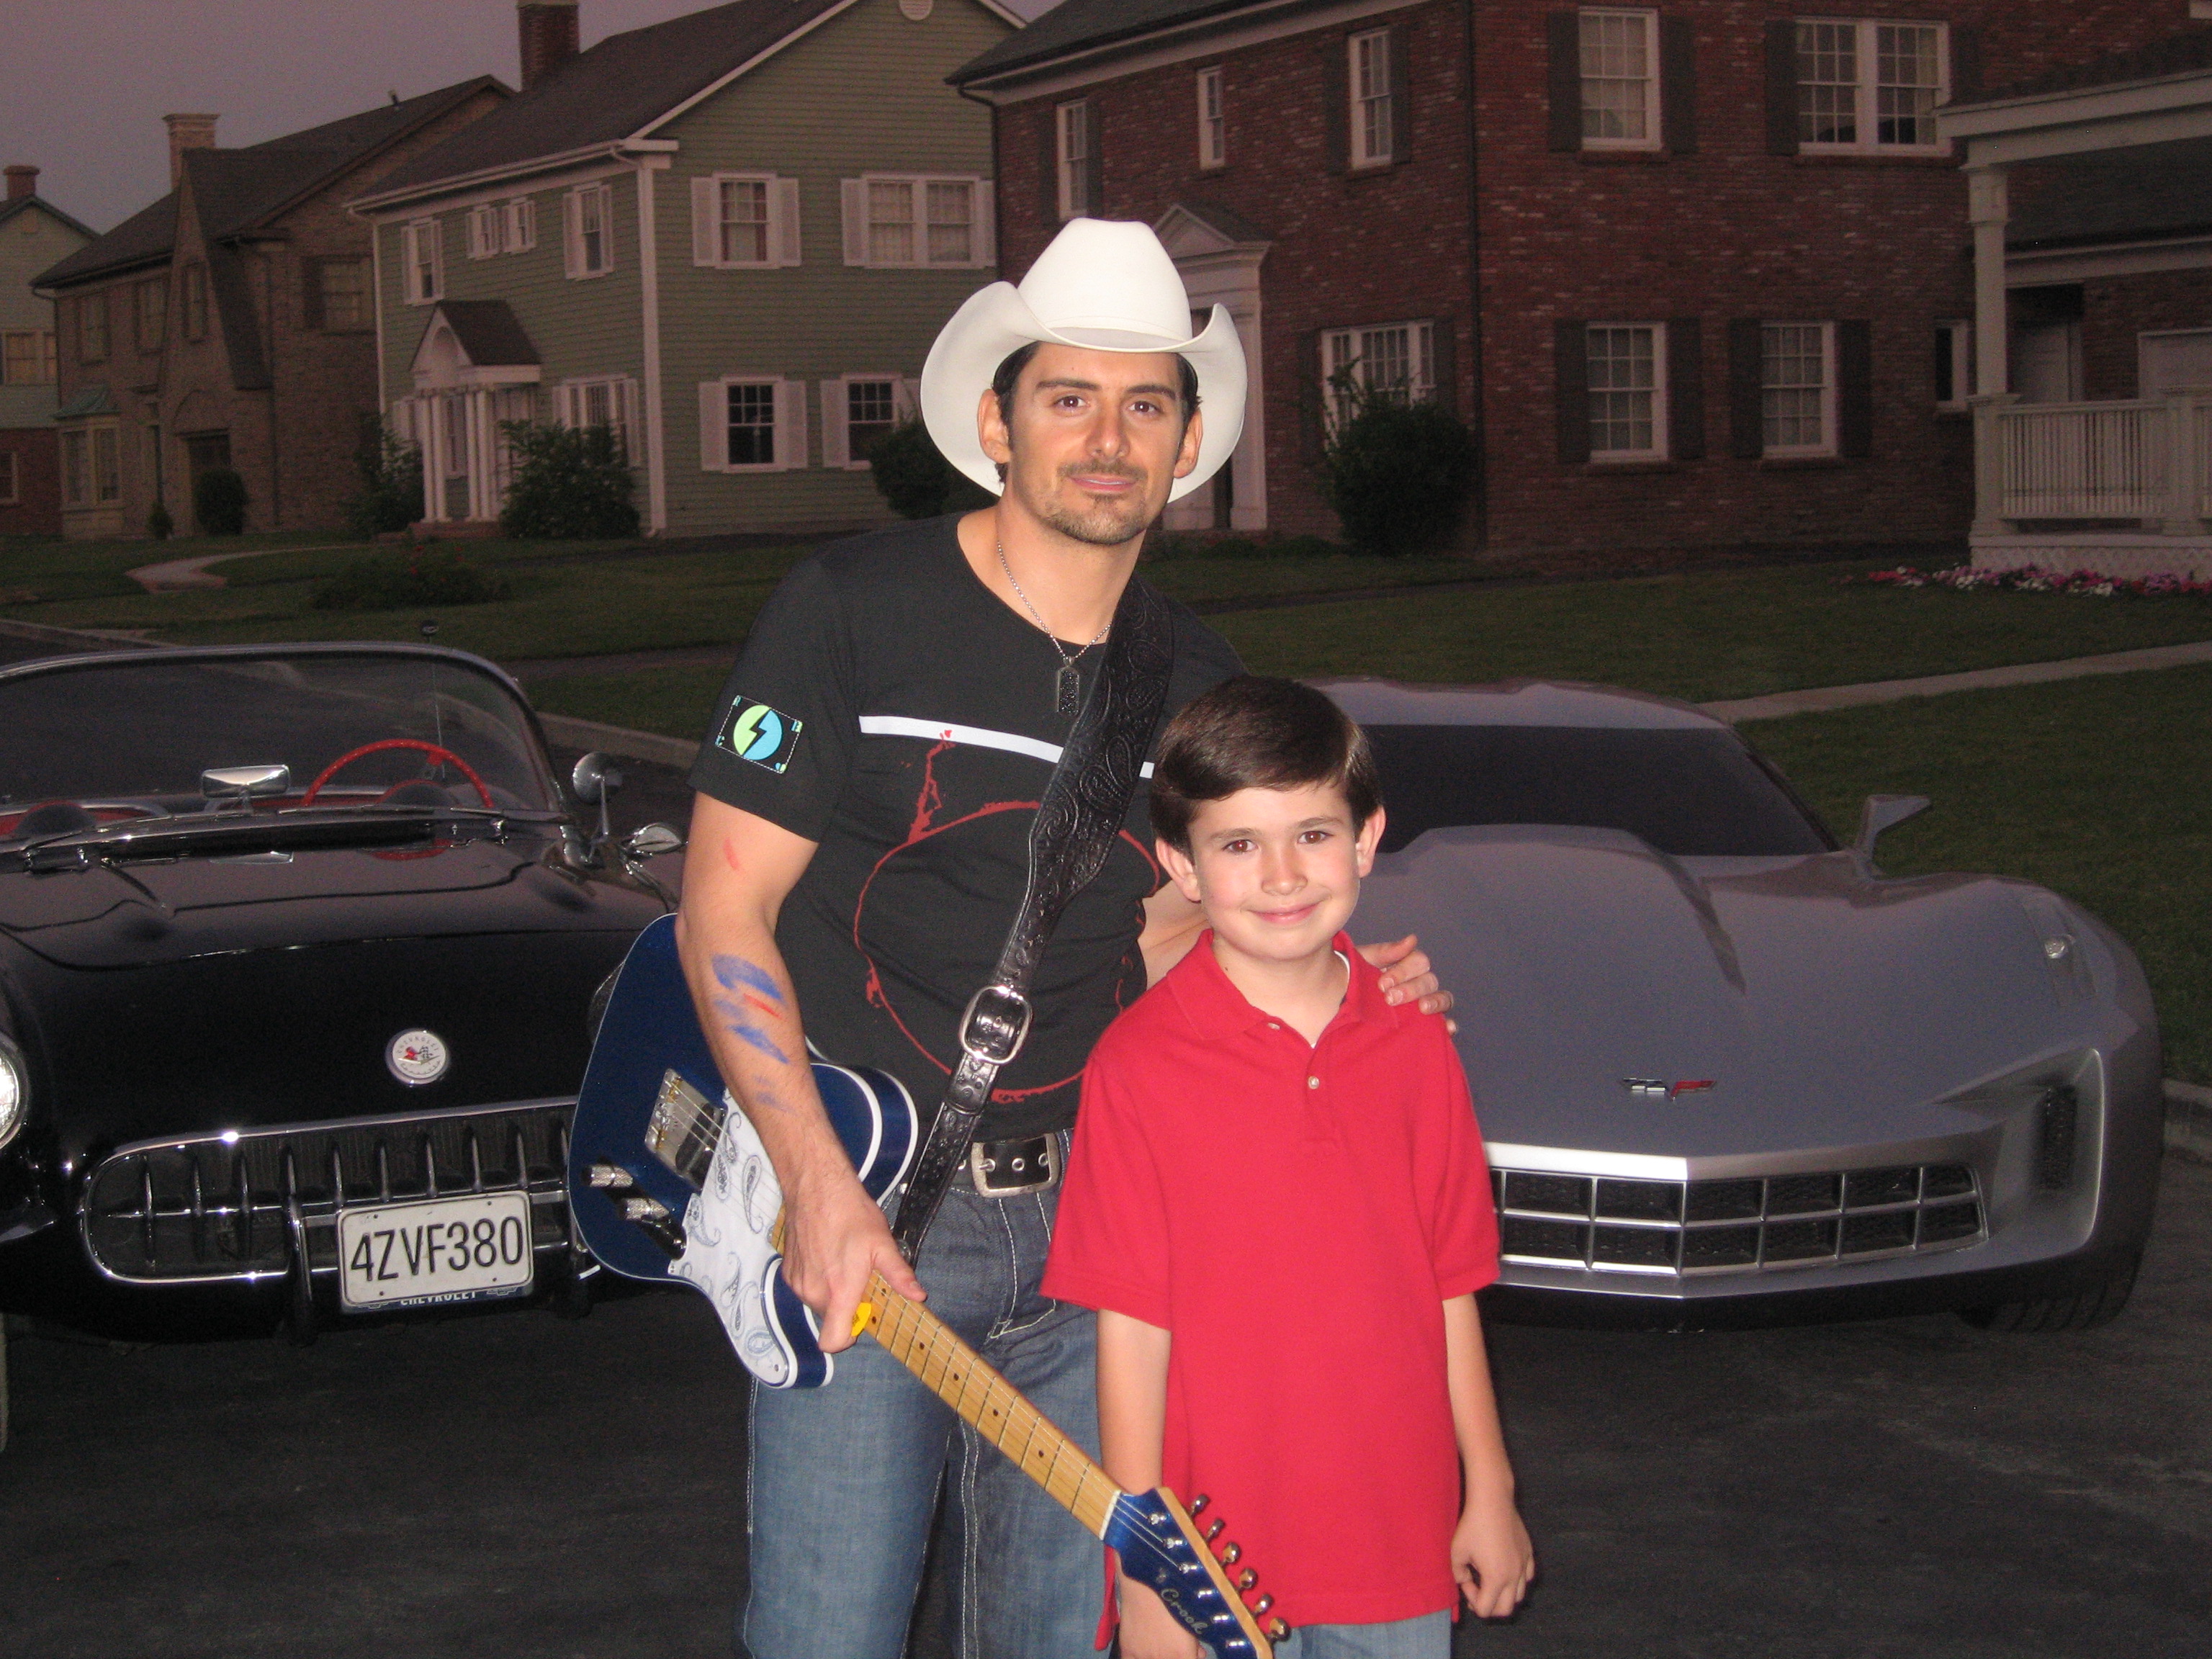 Brenden Miranda and Brad Paisley after a long day on the set. Brenden played 10 year old Brad Paisley in the Music Video 